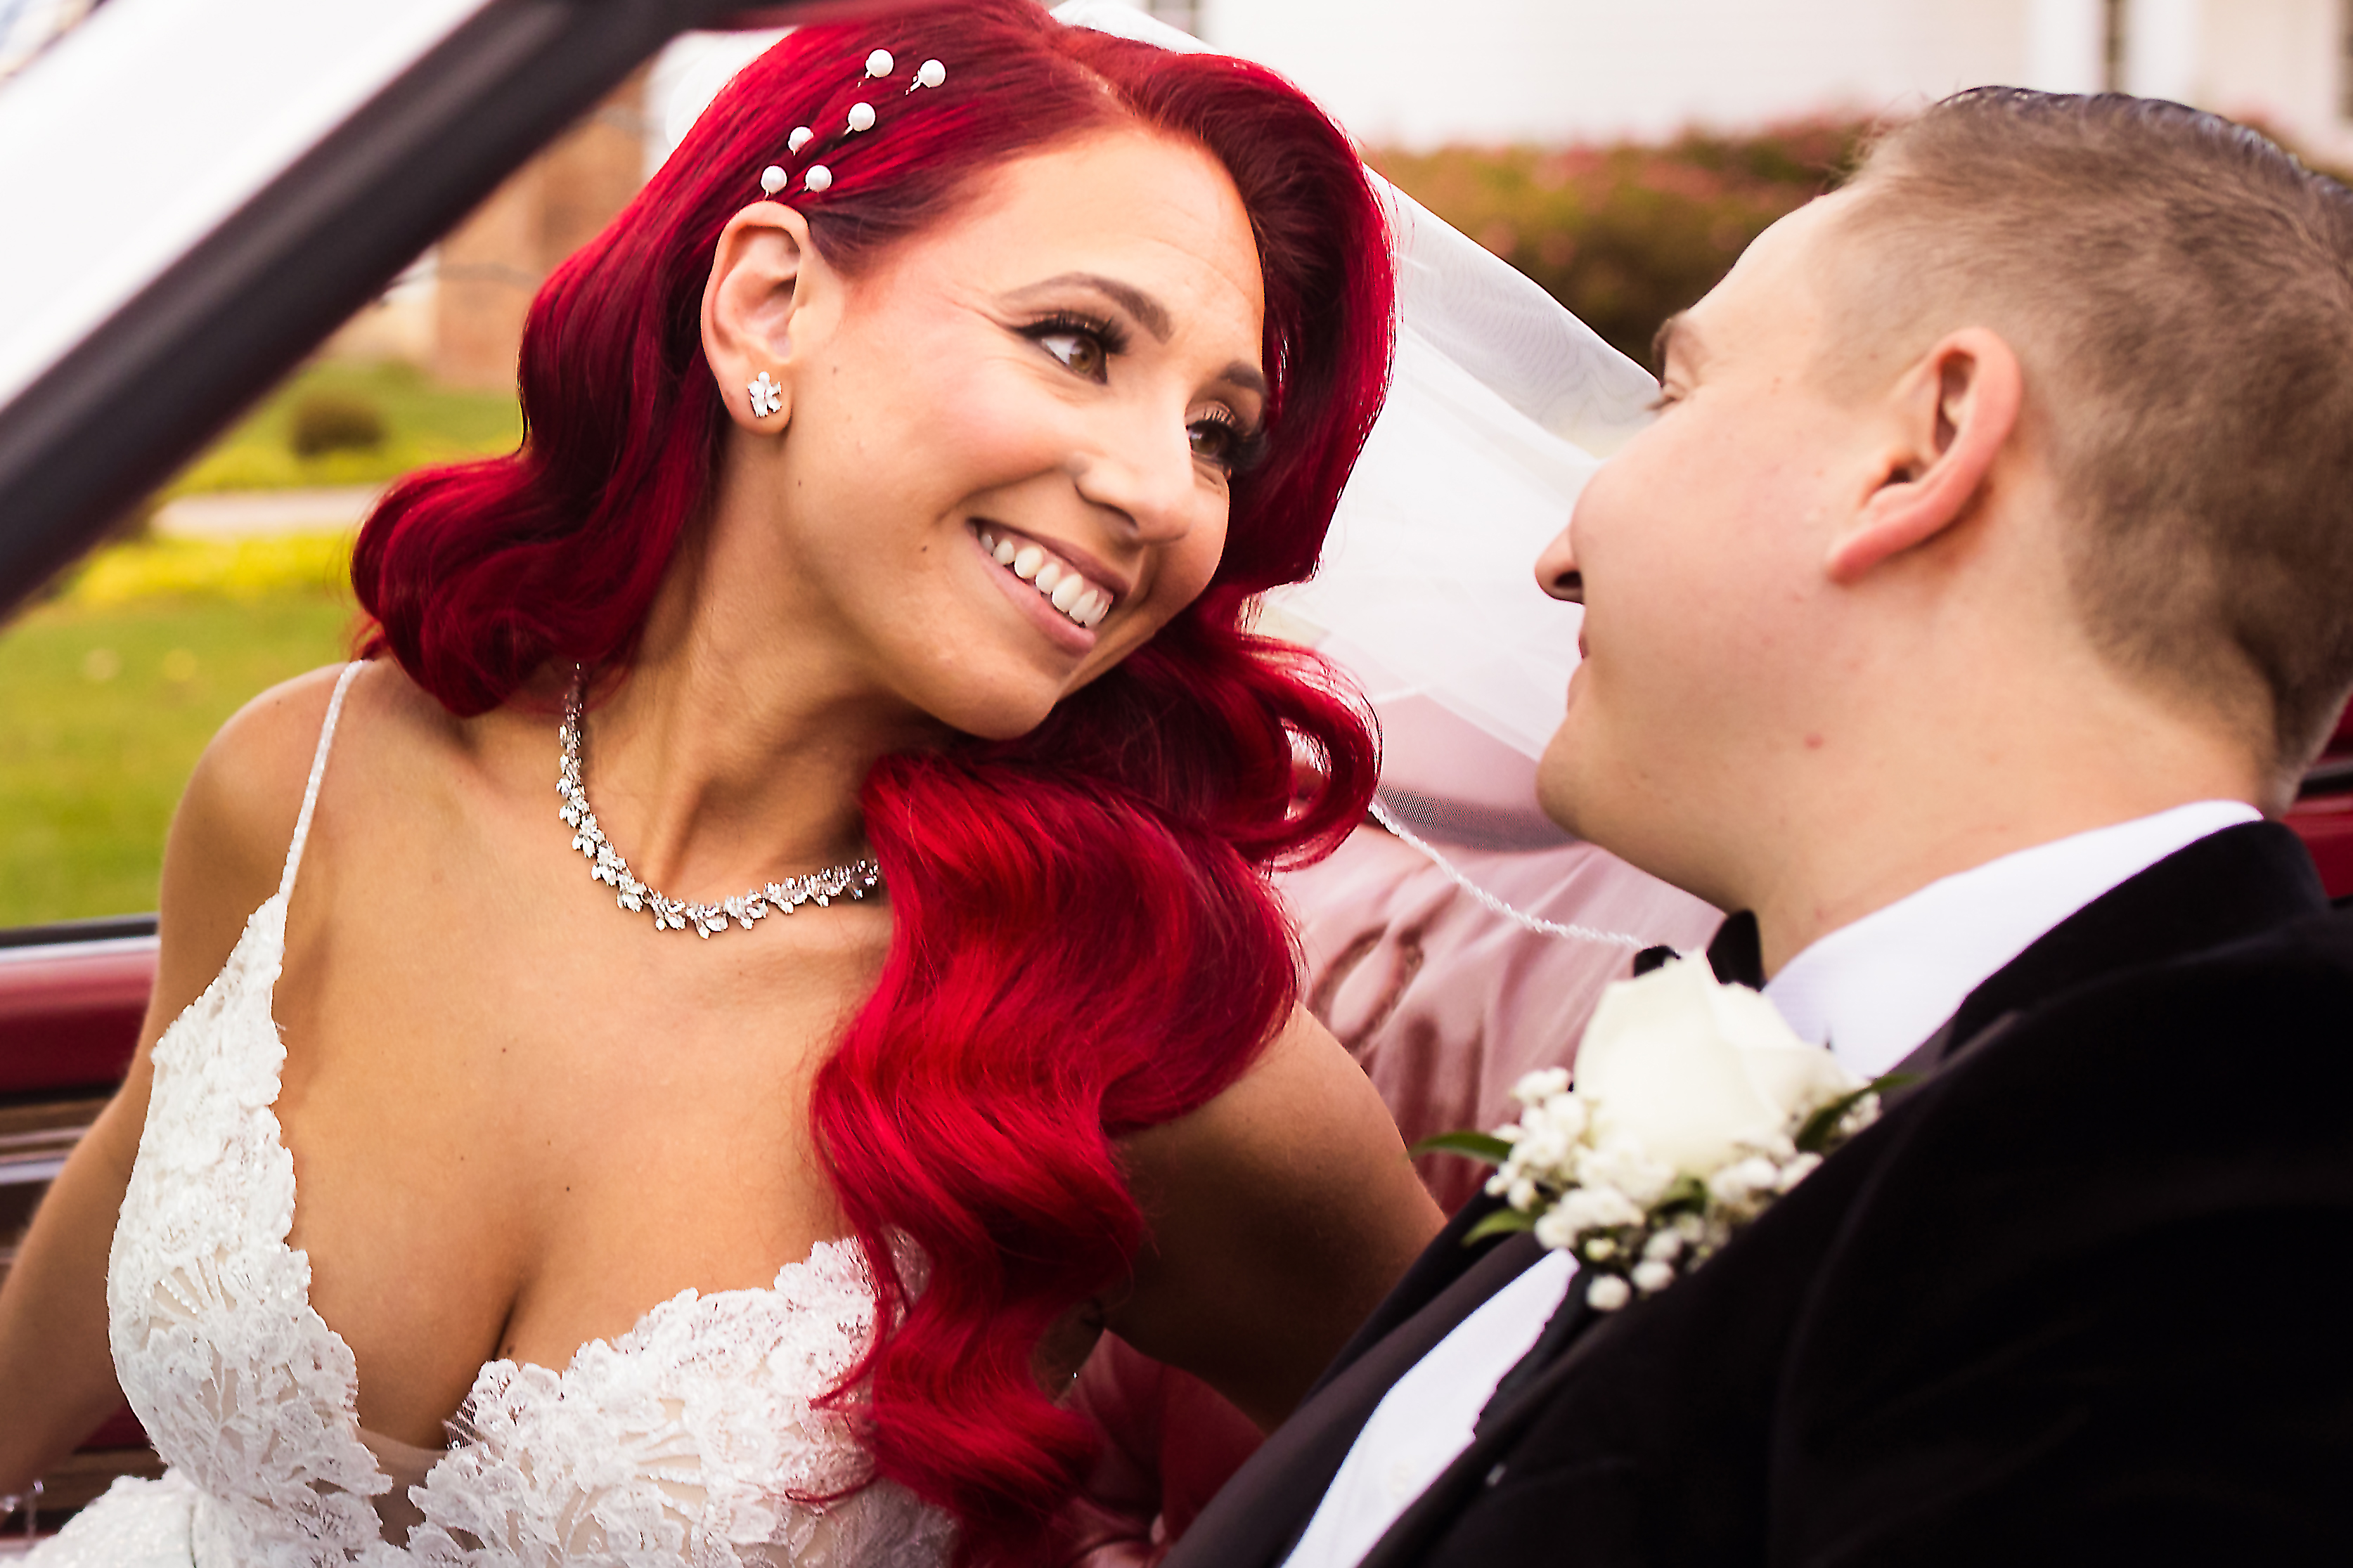 bride with red hair in convertible at their ryland inn wedding in morristown nj as photographed by creative award-winning photographer lisa rhinehart